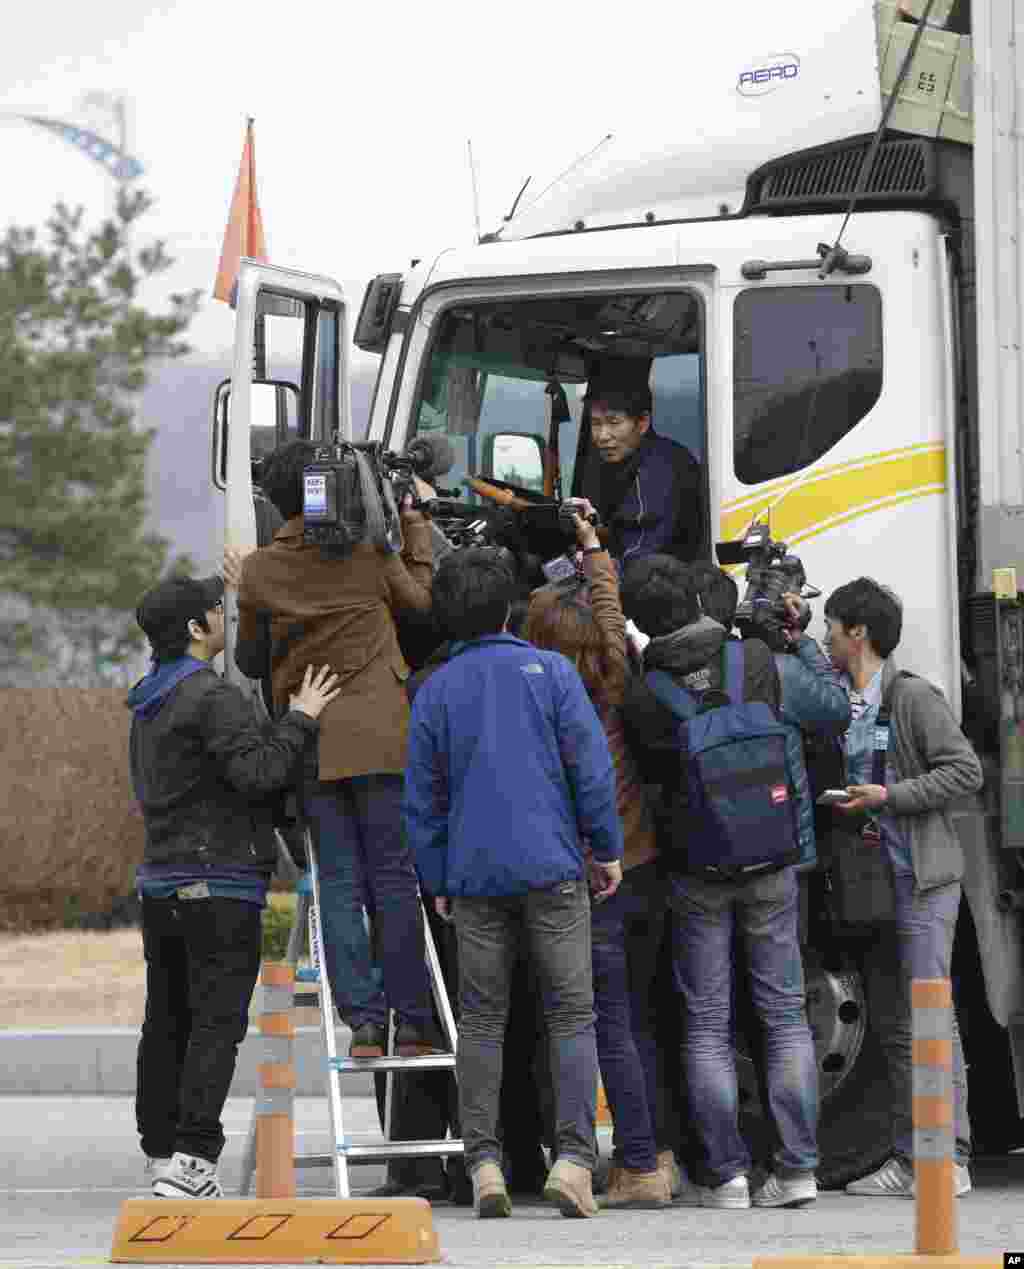 A South Korean worker arriving from North Korea's Kaesong is interviewed by the media at the customs, immigration and quarantine office near the border village of Panmunjom, April 8, 2013.